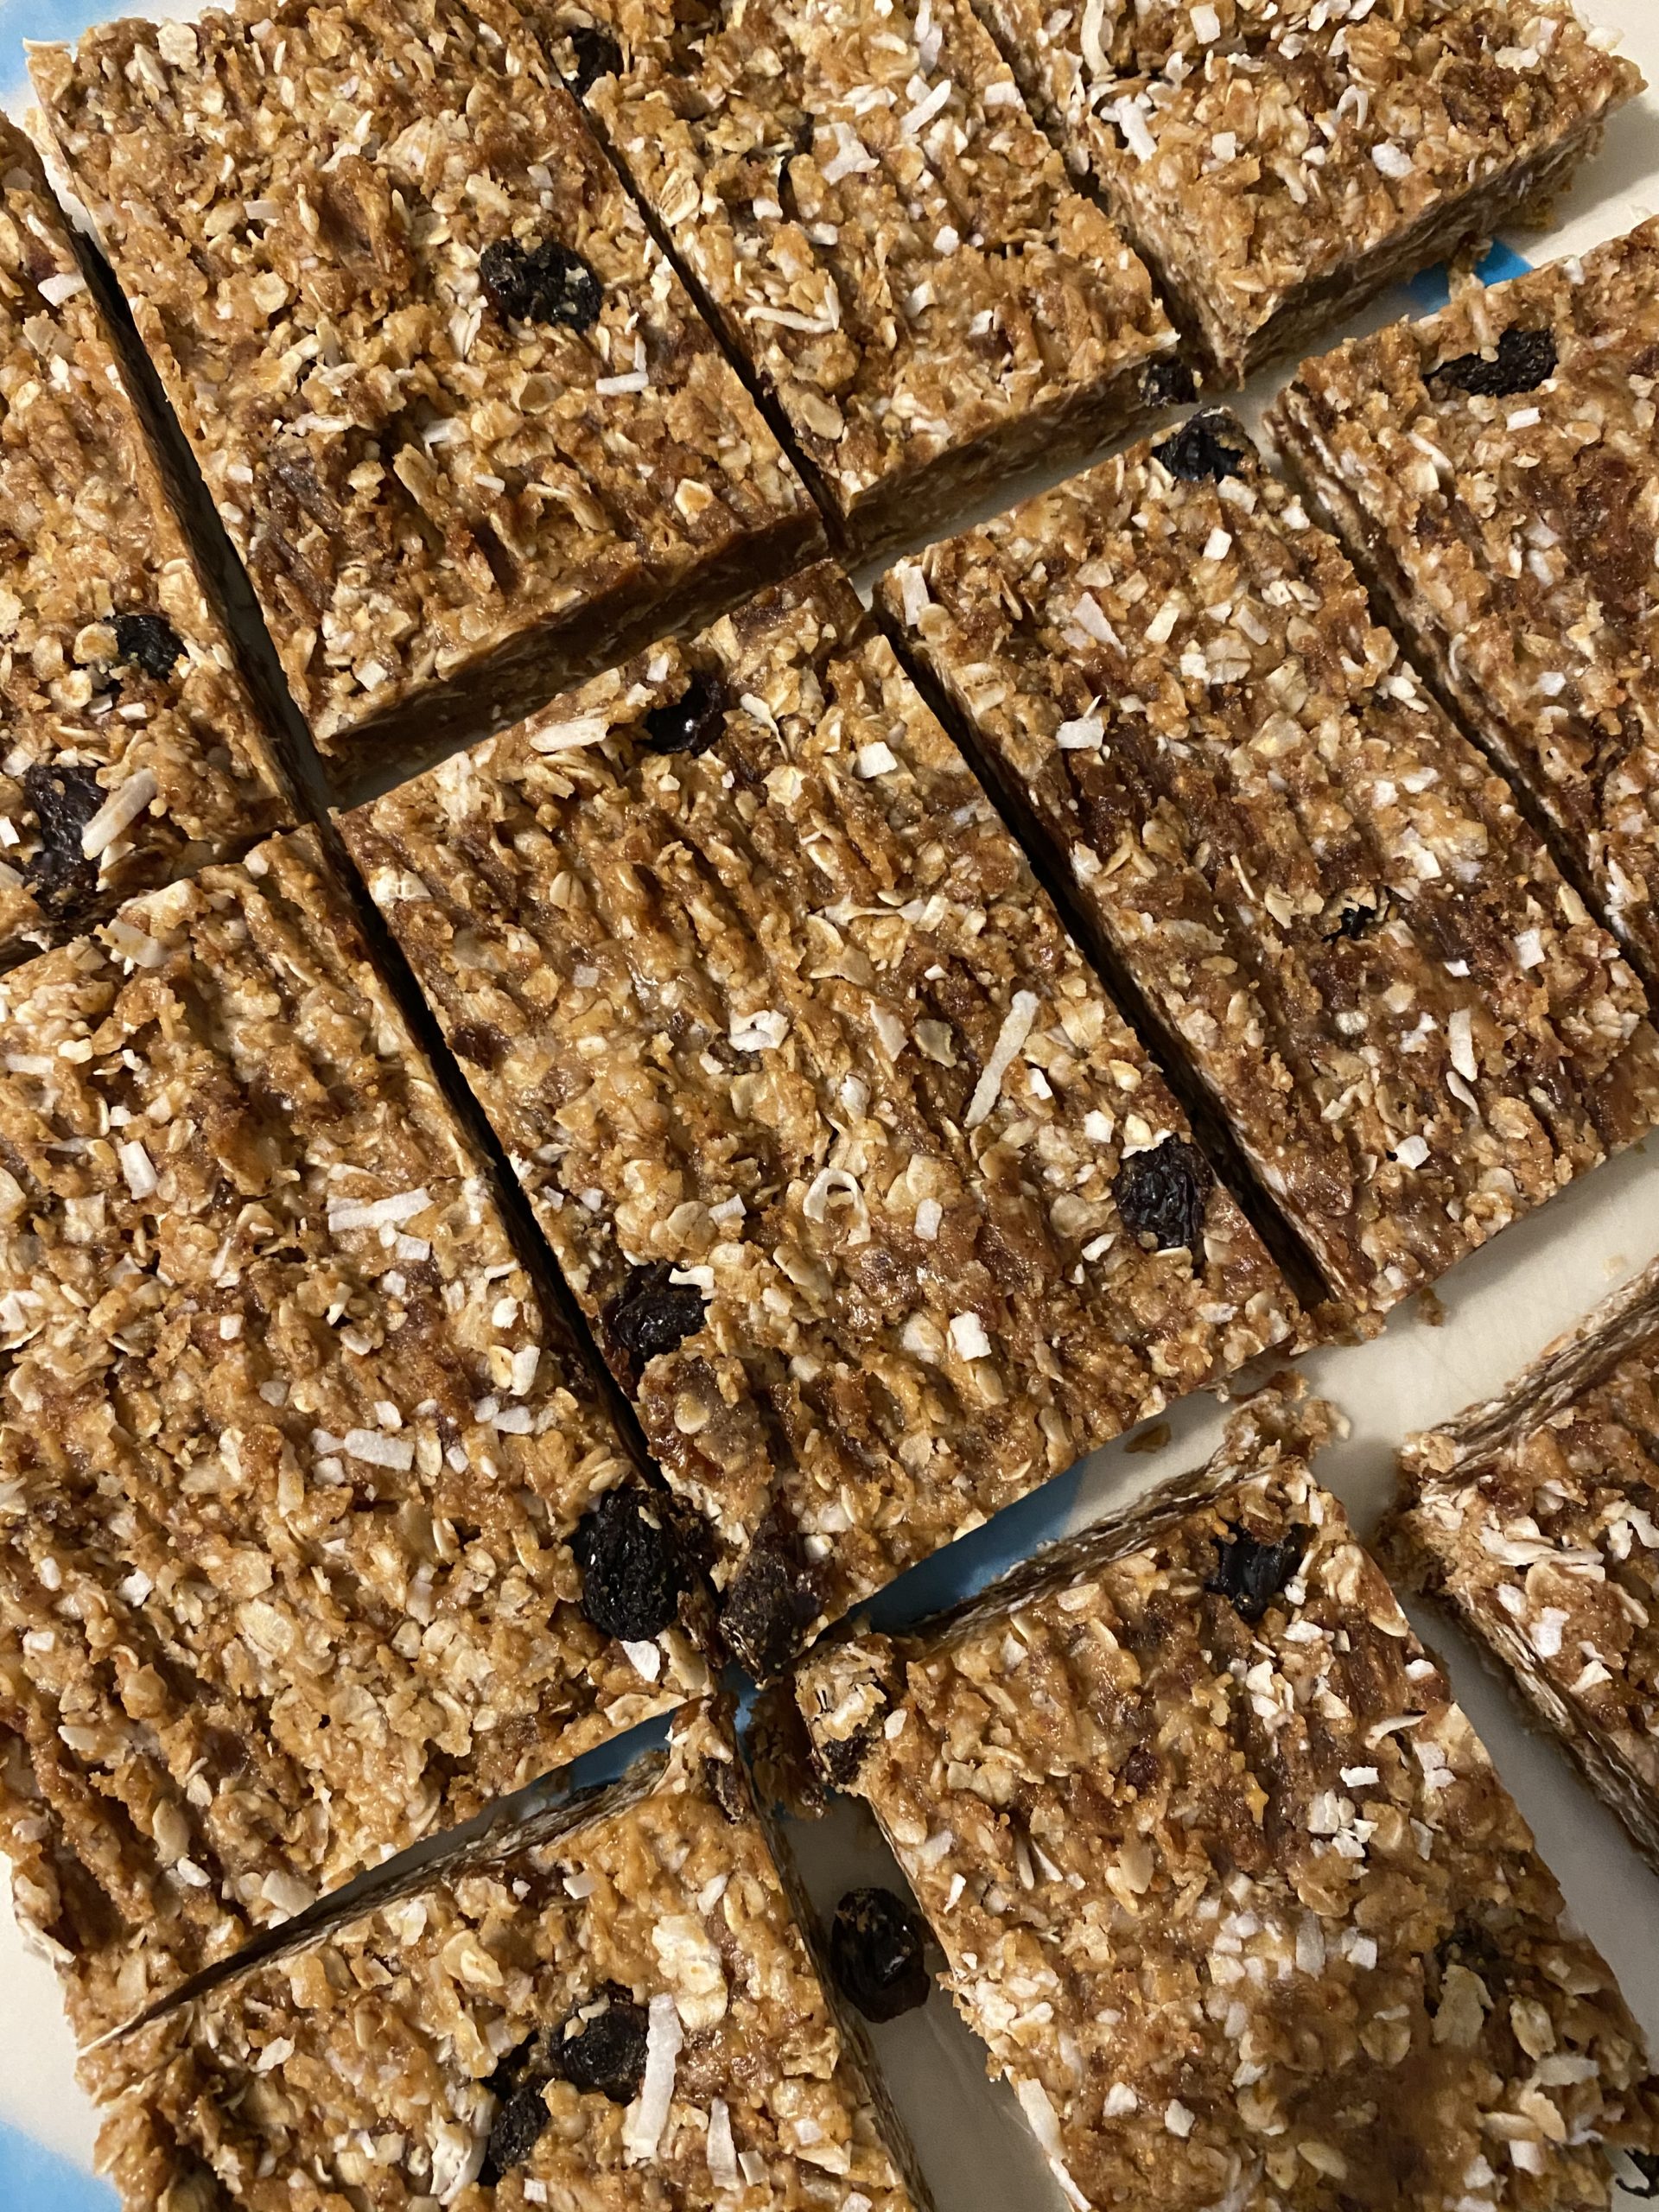 Peanut butter date granola bars ready to be enjoyed.